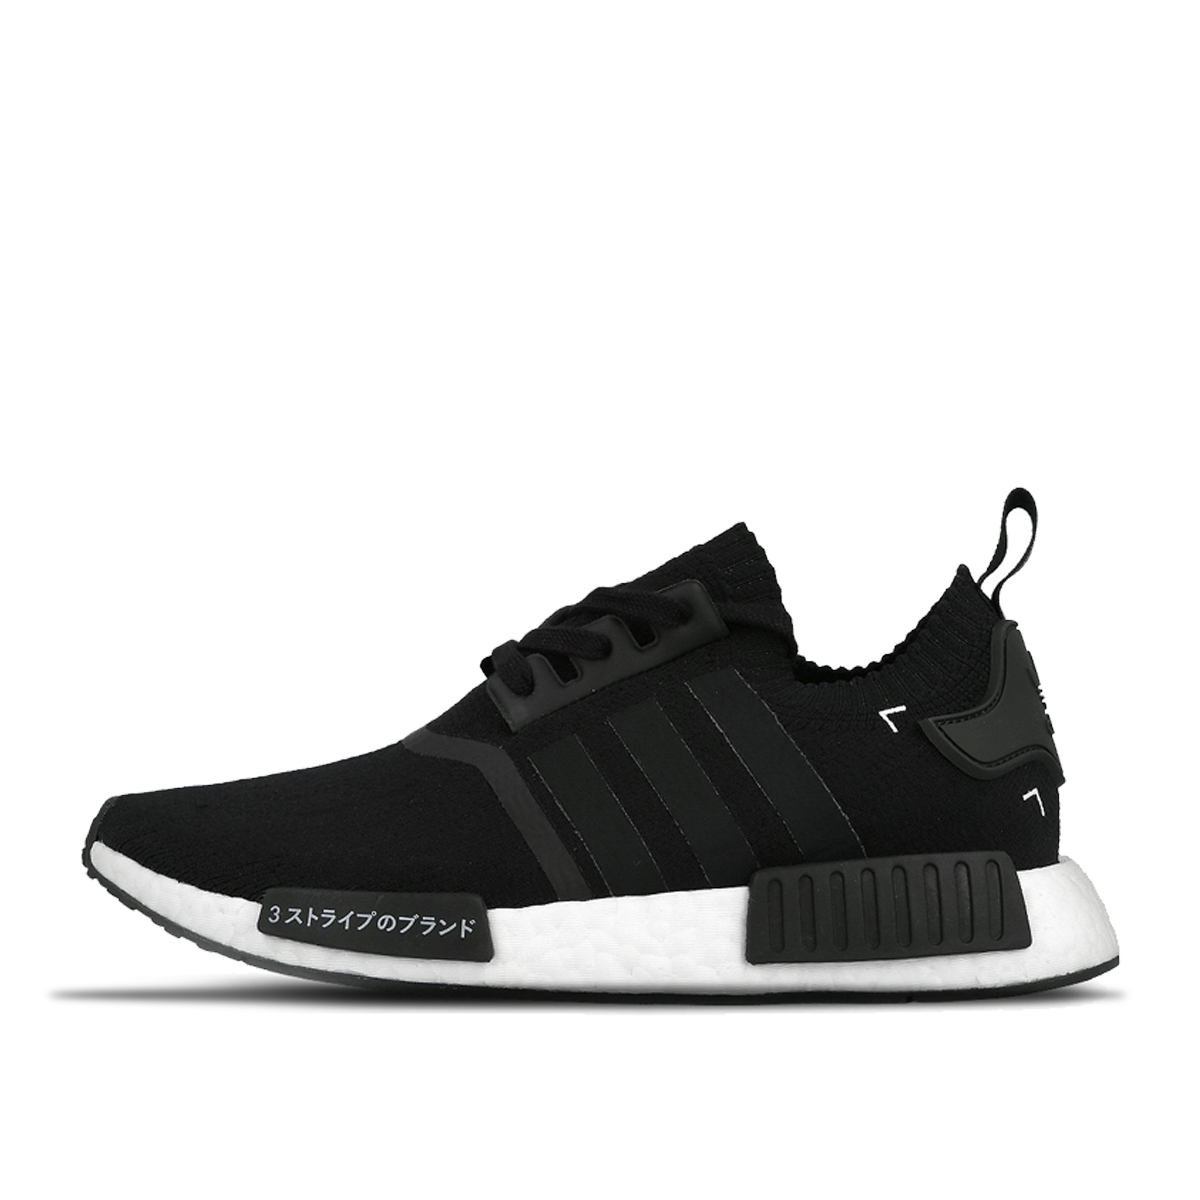 Sb-roscoffShops - adidas nmd r1 w by3033 black edition free - Check Out Louis  Vuitton's New LVSK8 and High 8 Sneakers